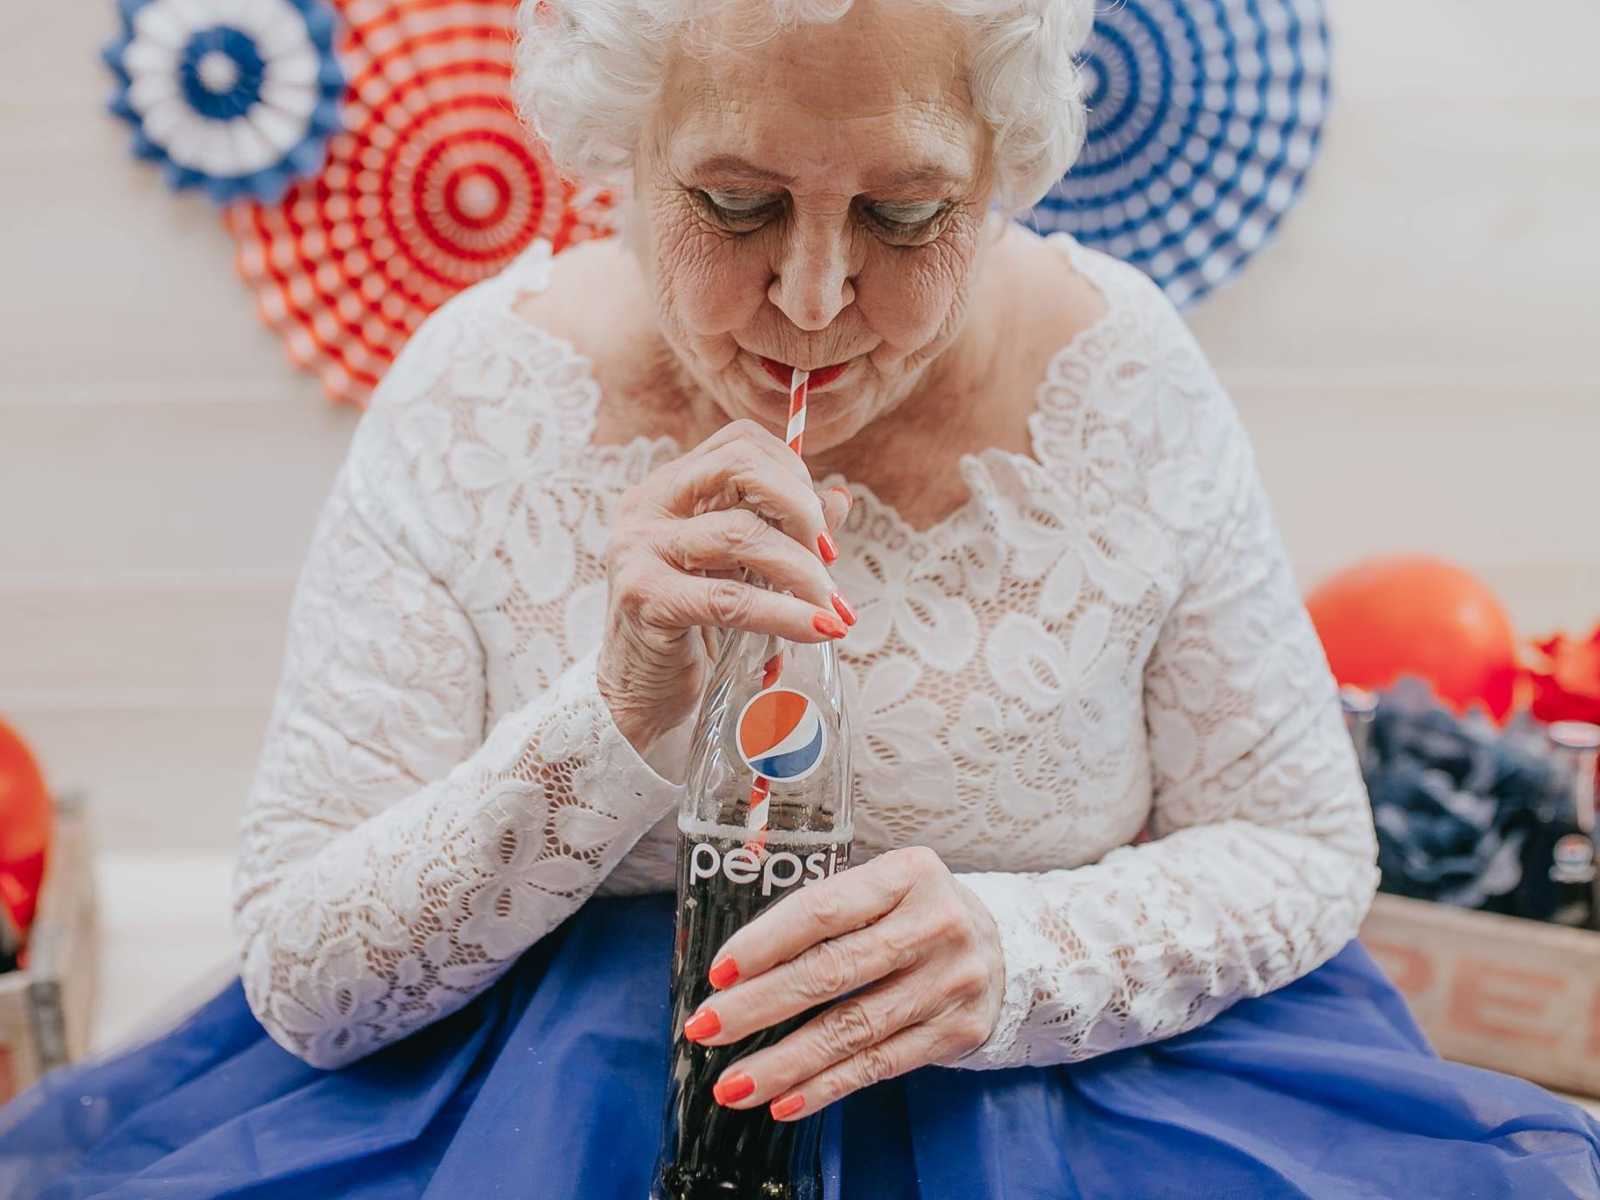 elderly woman takes sip from red and white straw in glass pepsi glass